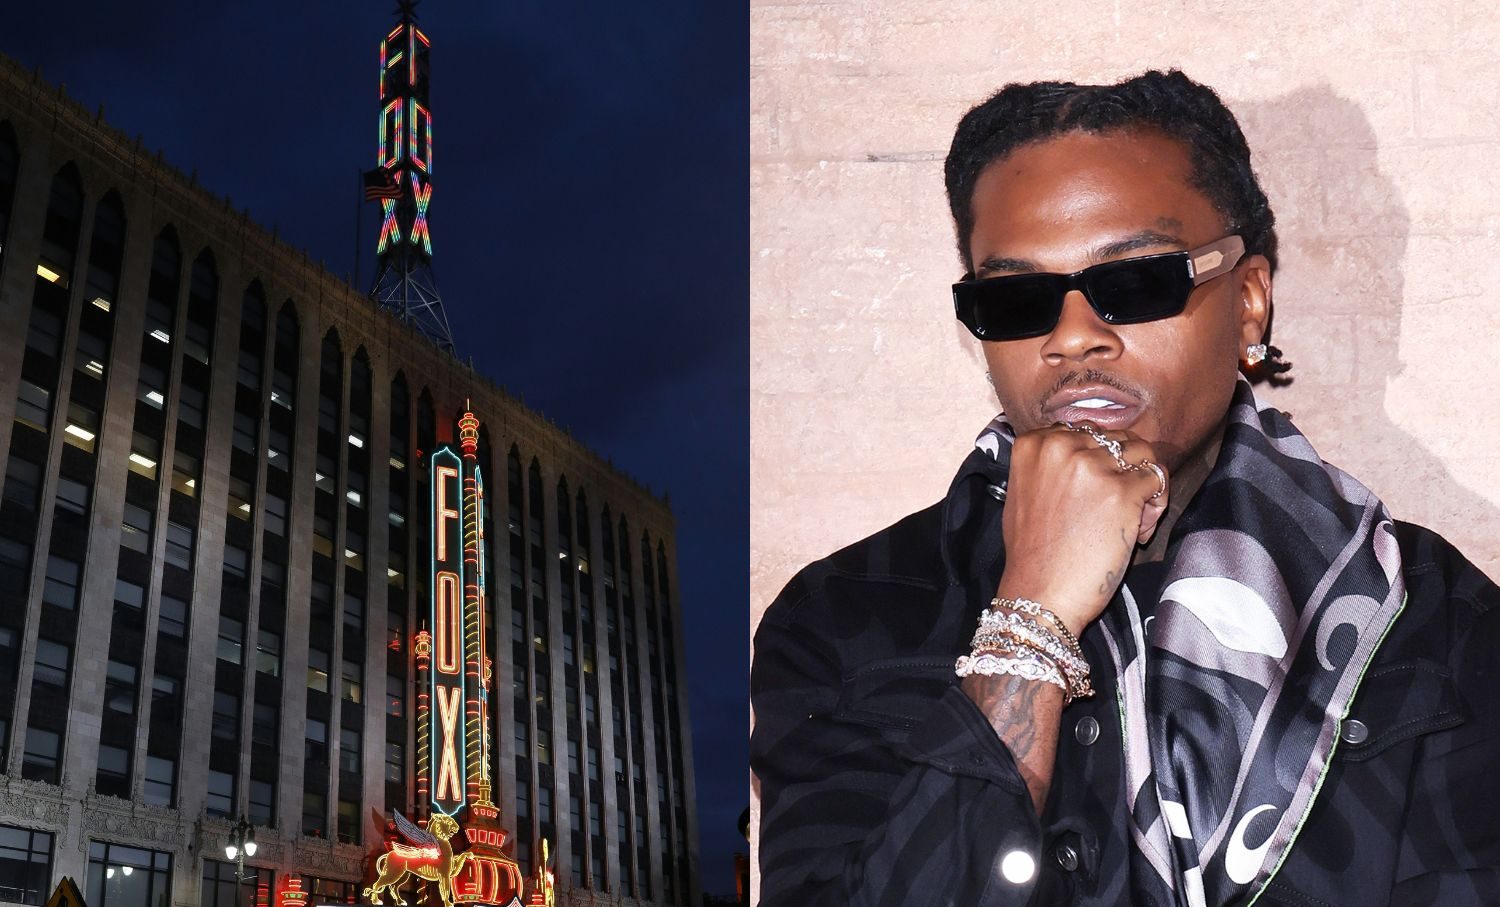 Detroit Venue Reacts: Video Of Wobbling Balcony At Gunna Show